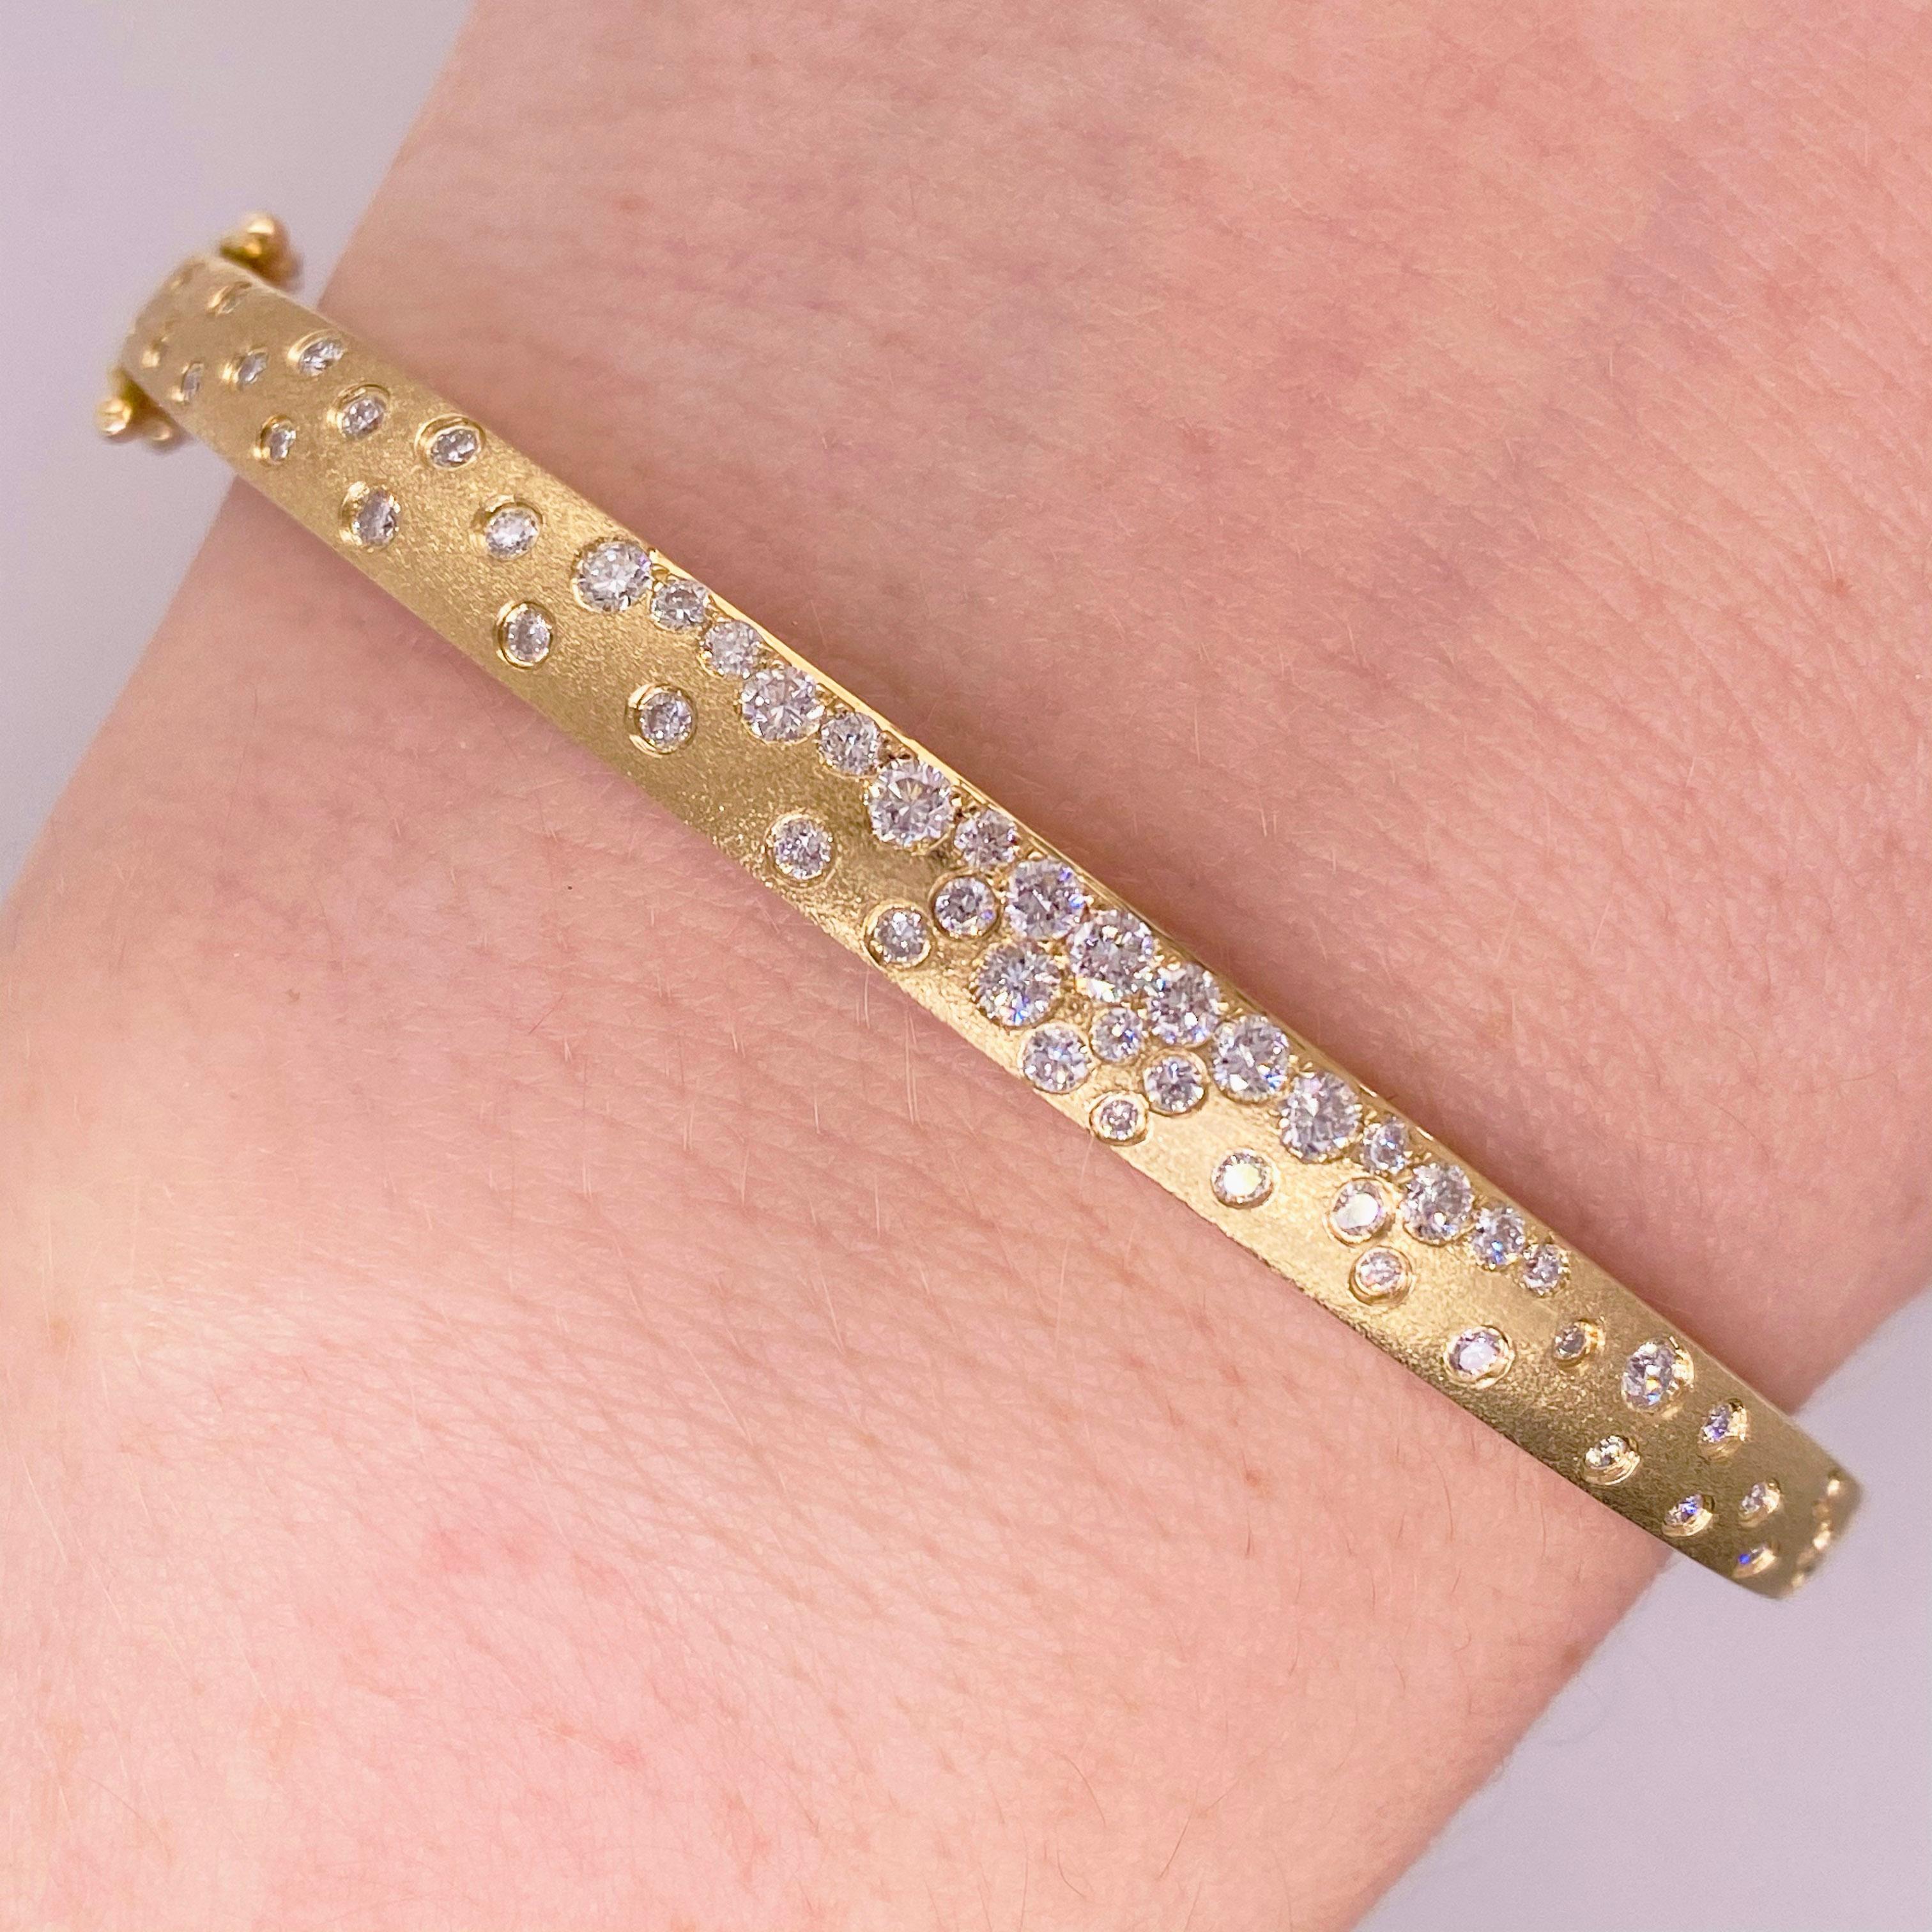 This Galaxy Diamond Bracelet has beautiful brushed gold with the diamonds all set flush.  The bangle bracelet has .83 carats of brilliant white diamonds set in brushed 14 karat yellow gold! This one of a kind piece is a cute addition to any fine